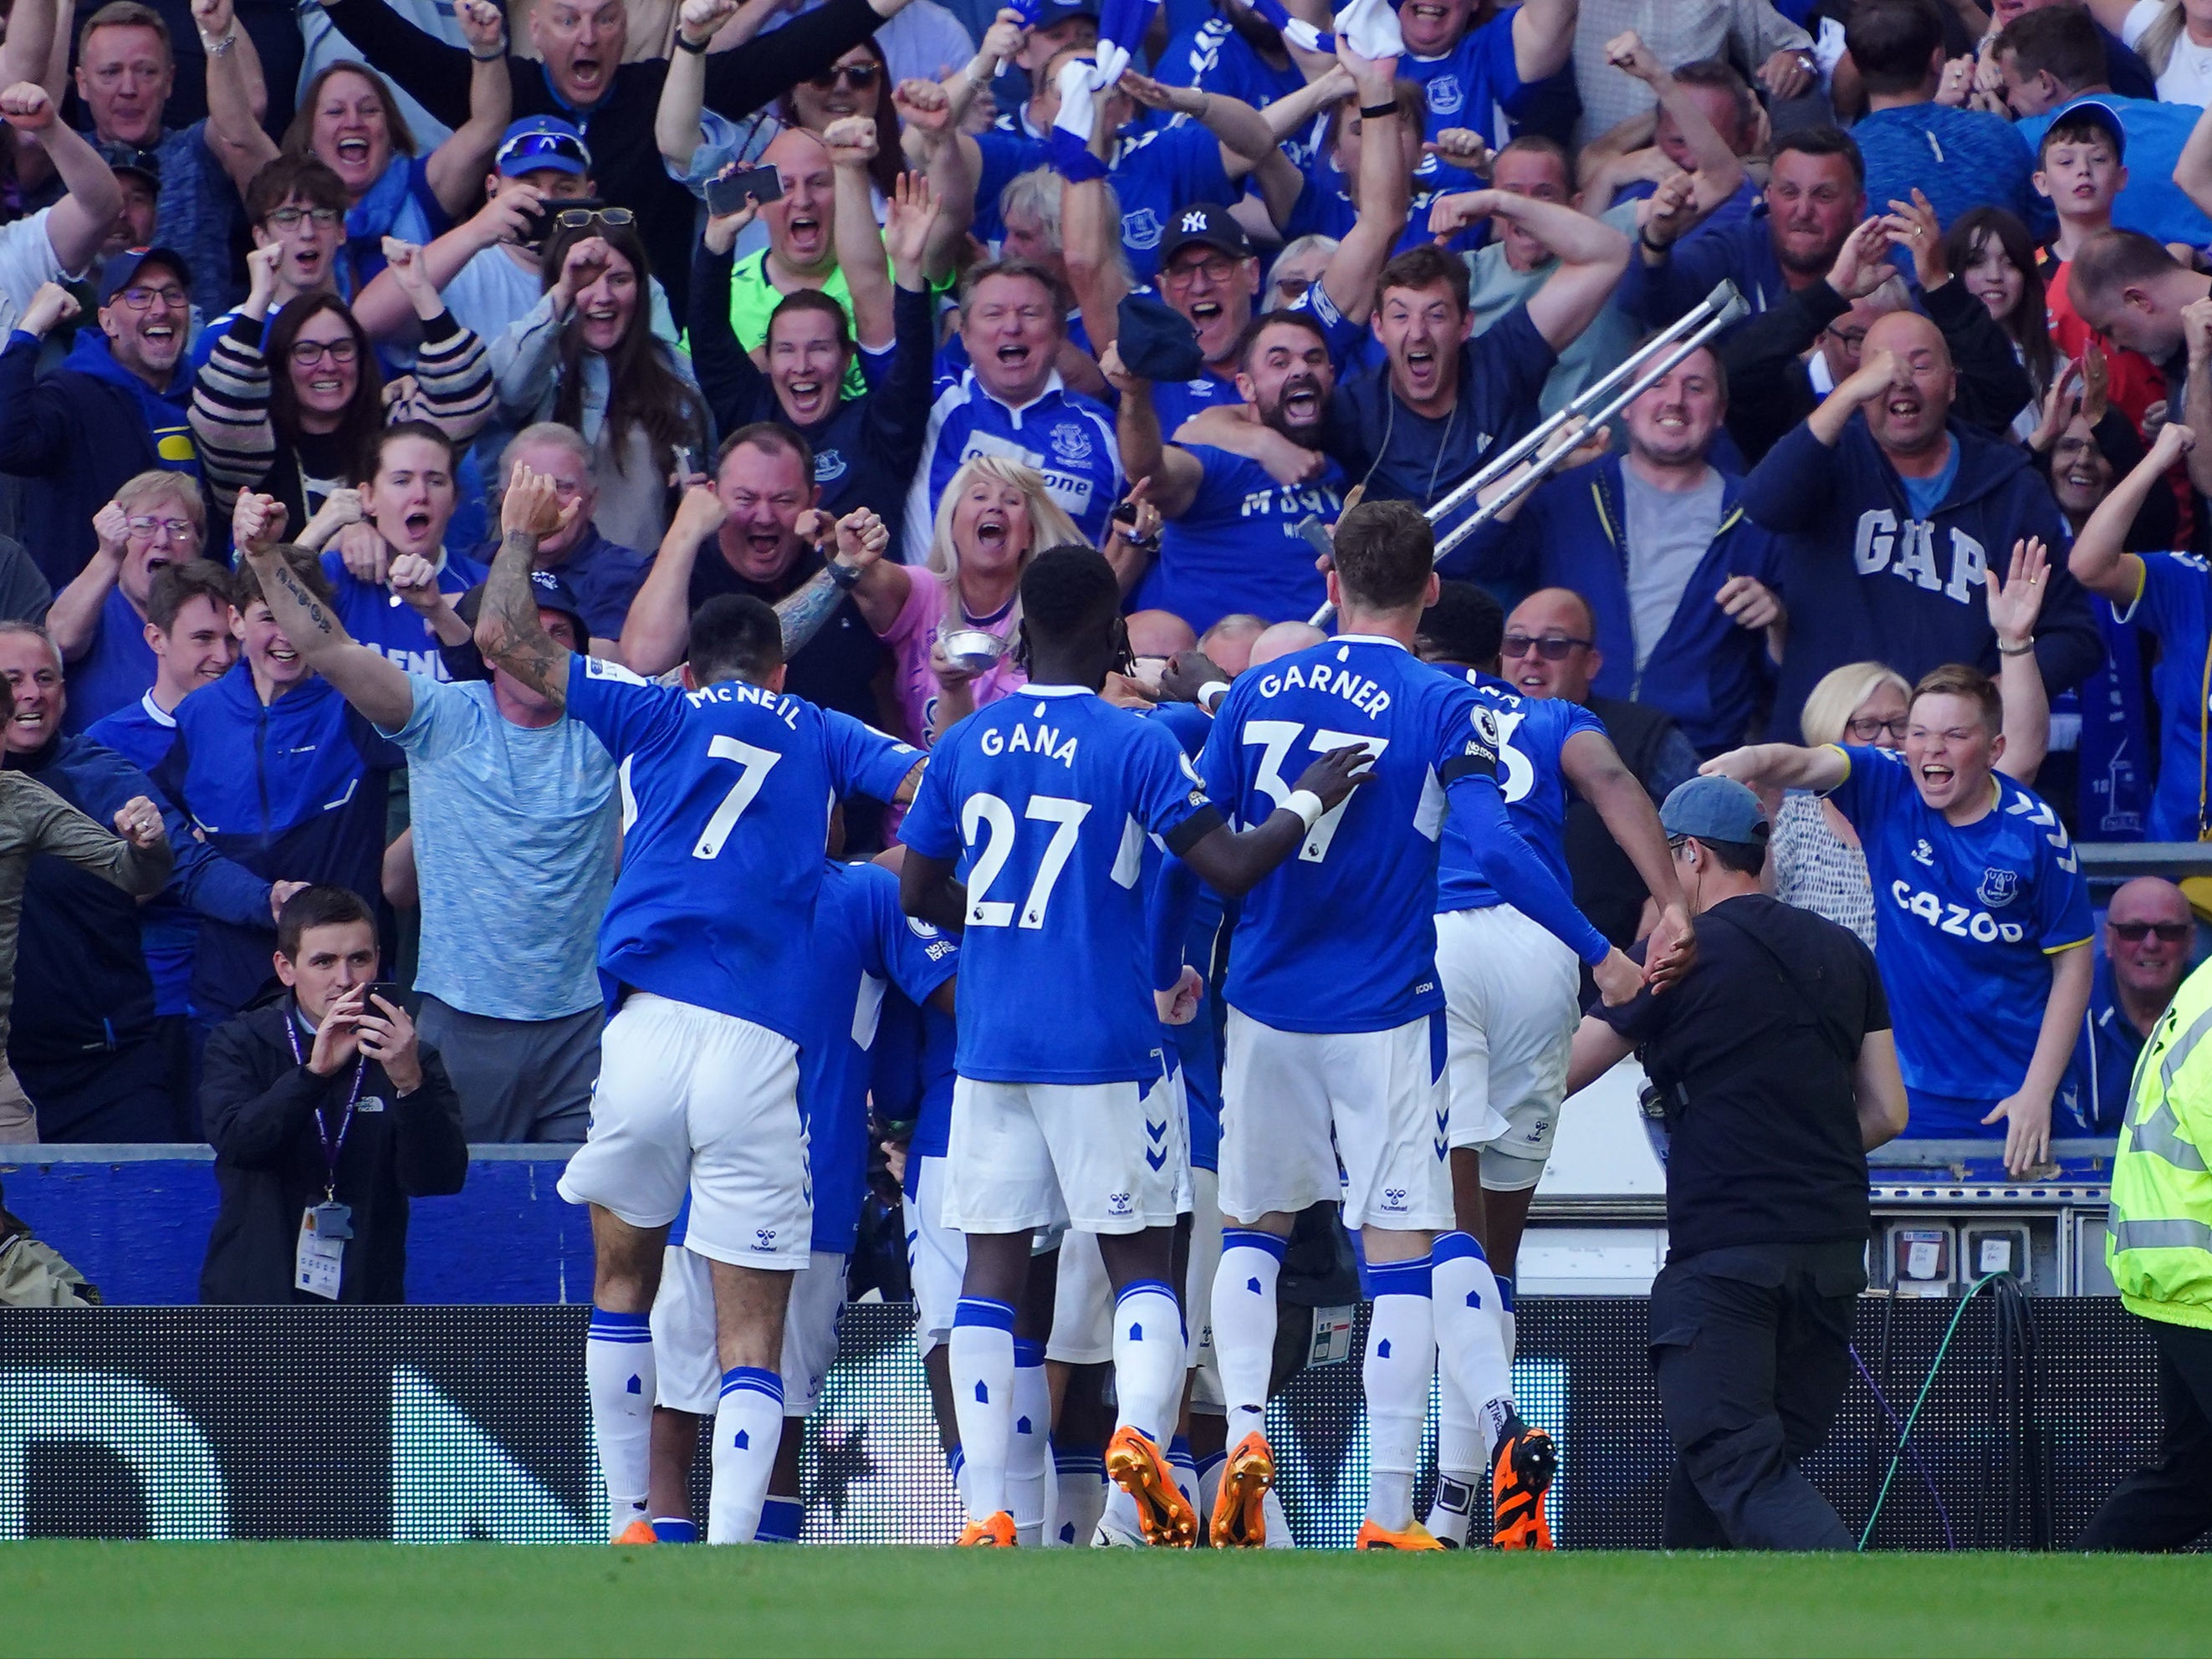 The team and fans celebrate as Everton go ahead